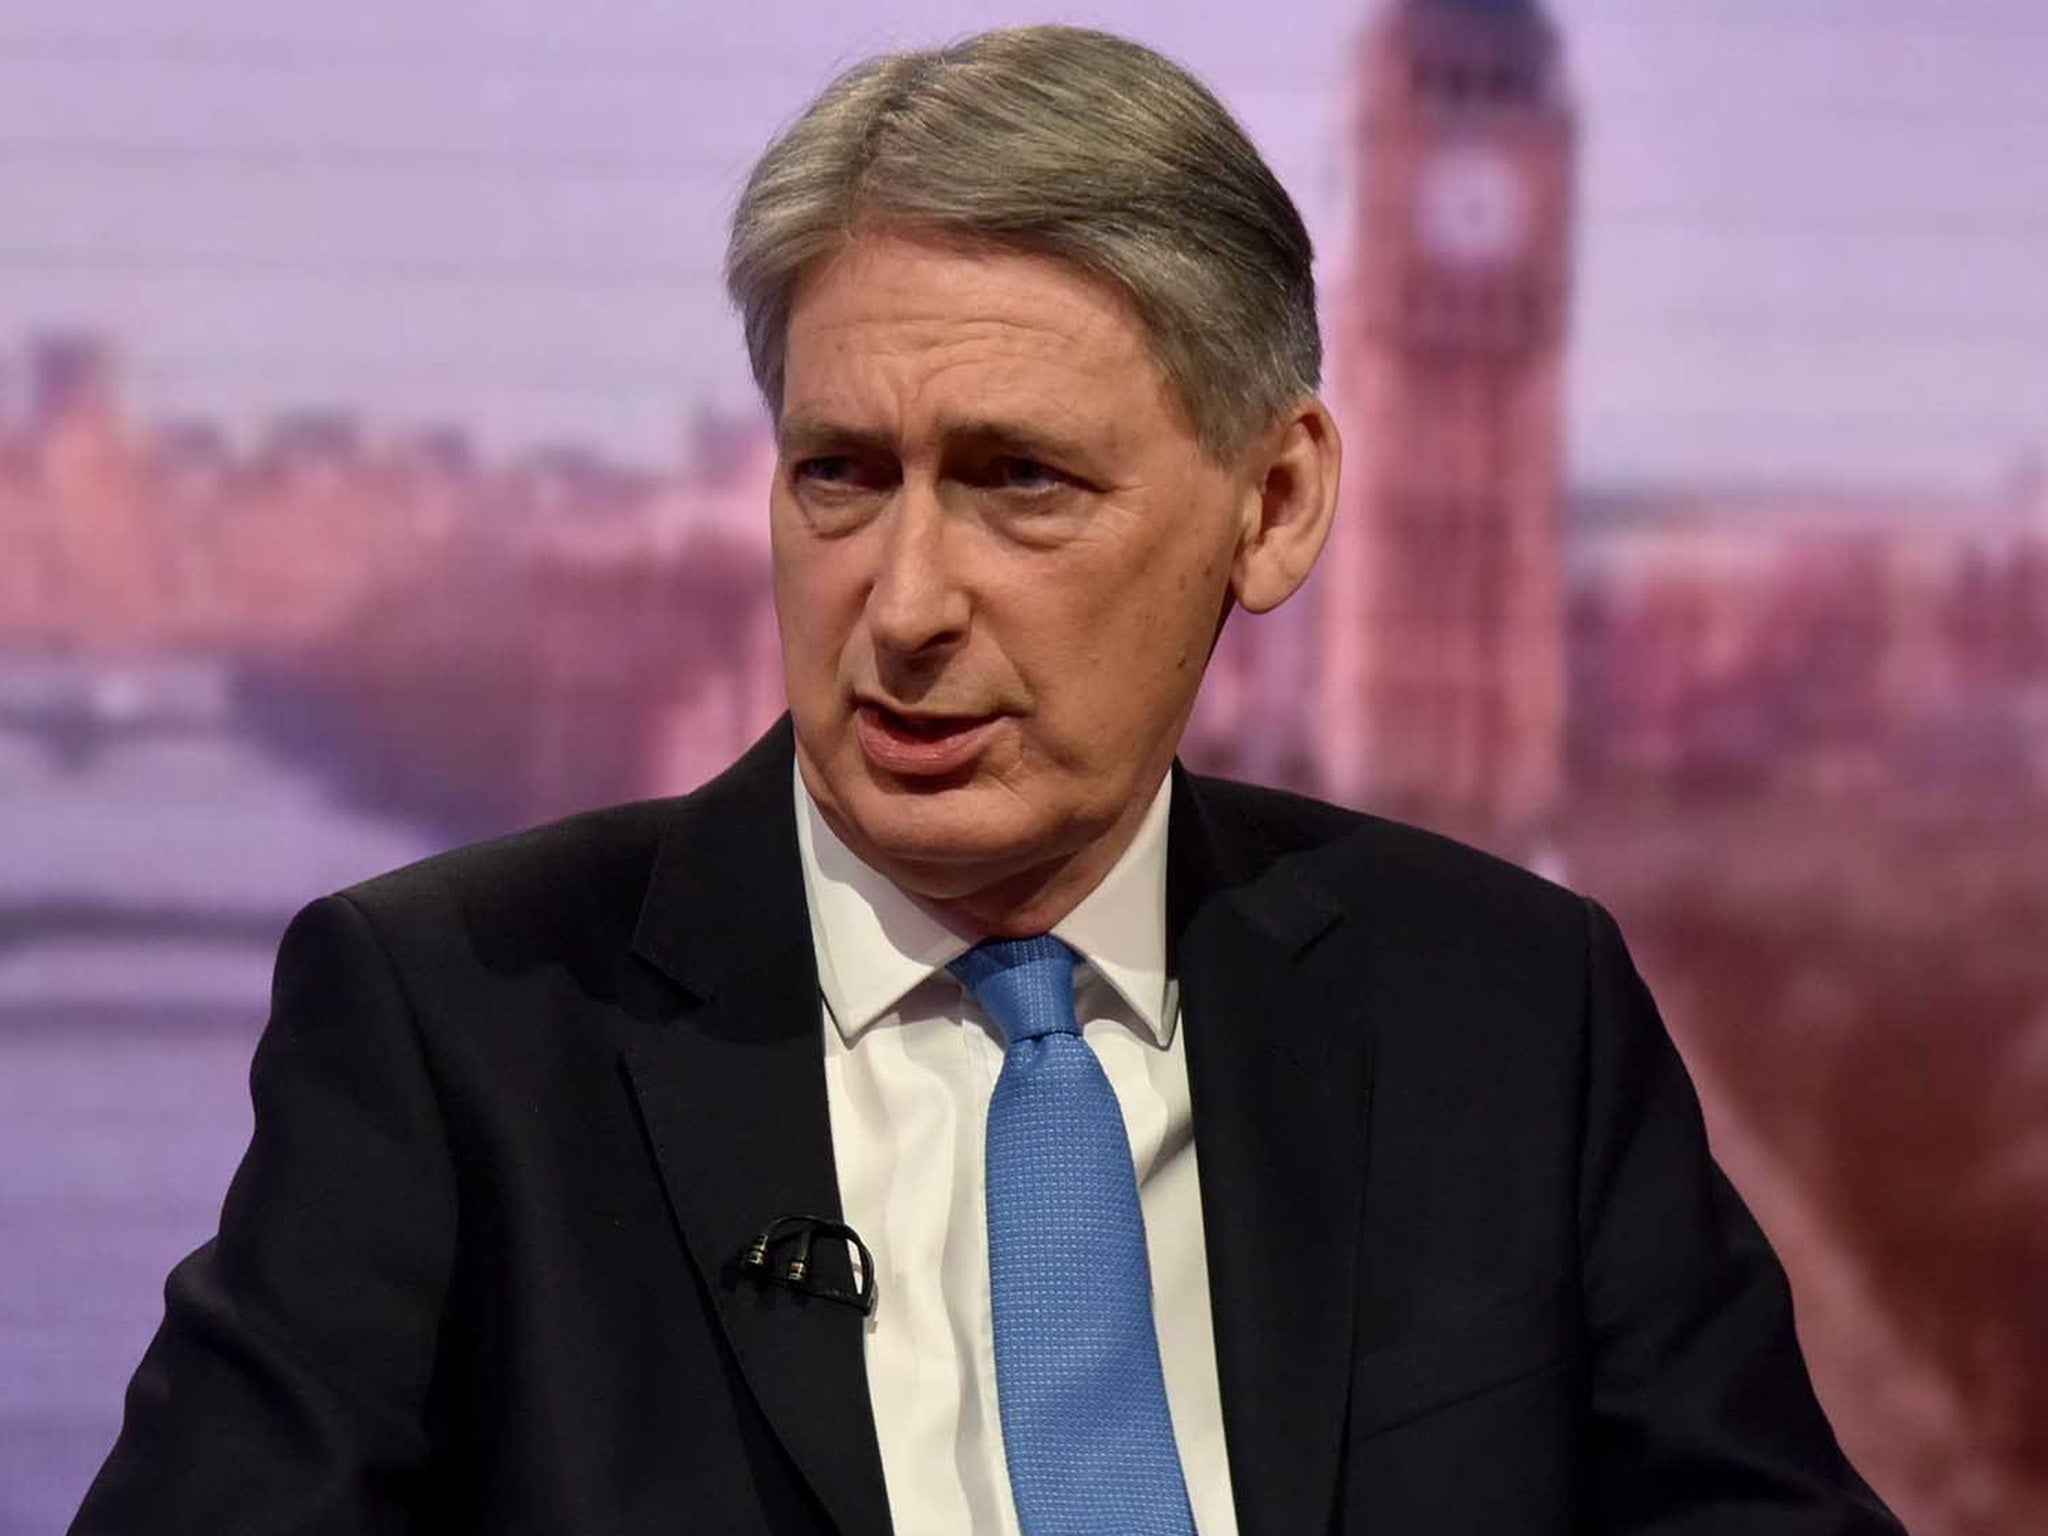 Chancellor Philip Hammond will unveil his 2018 Budget a week on Monday